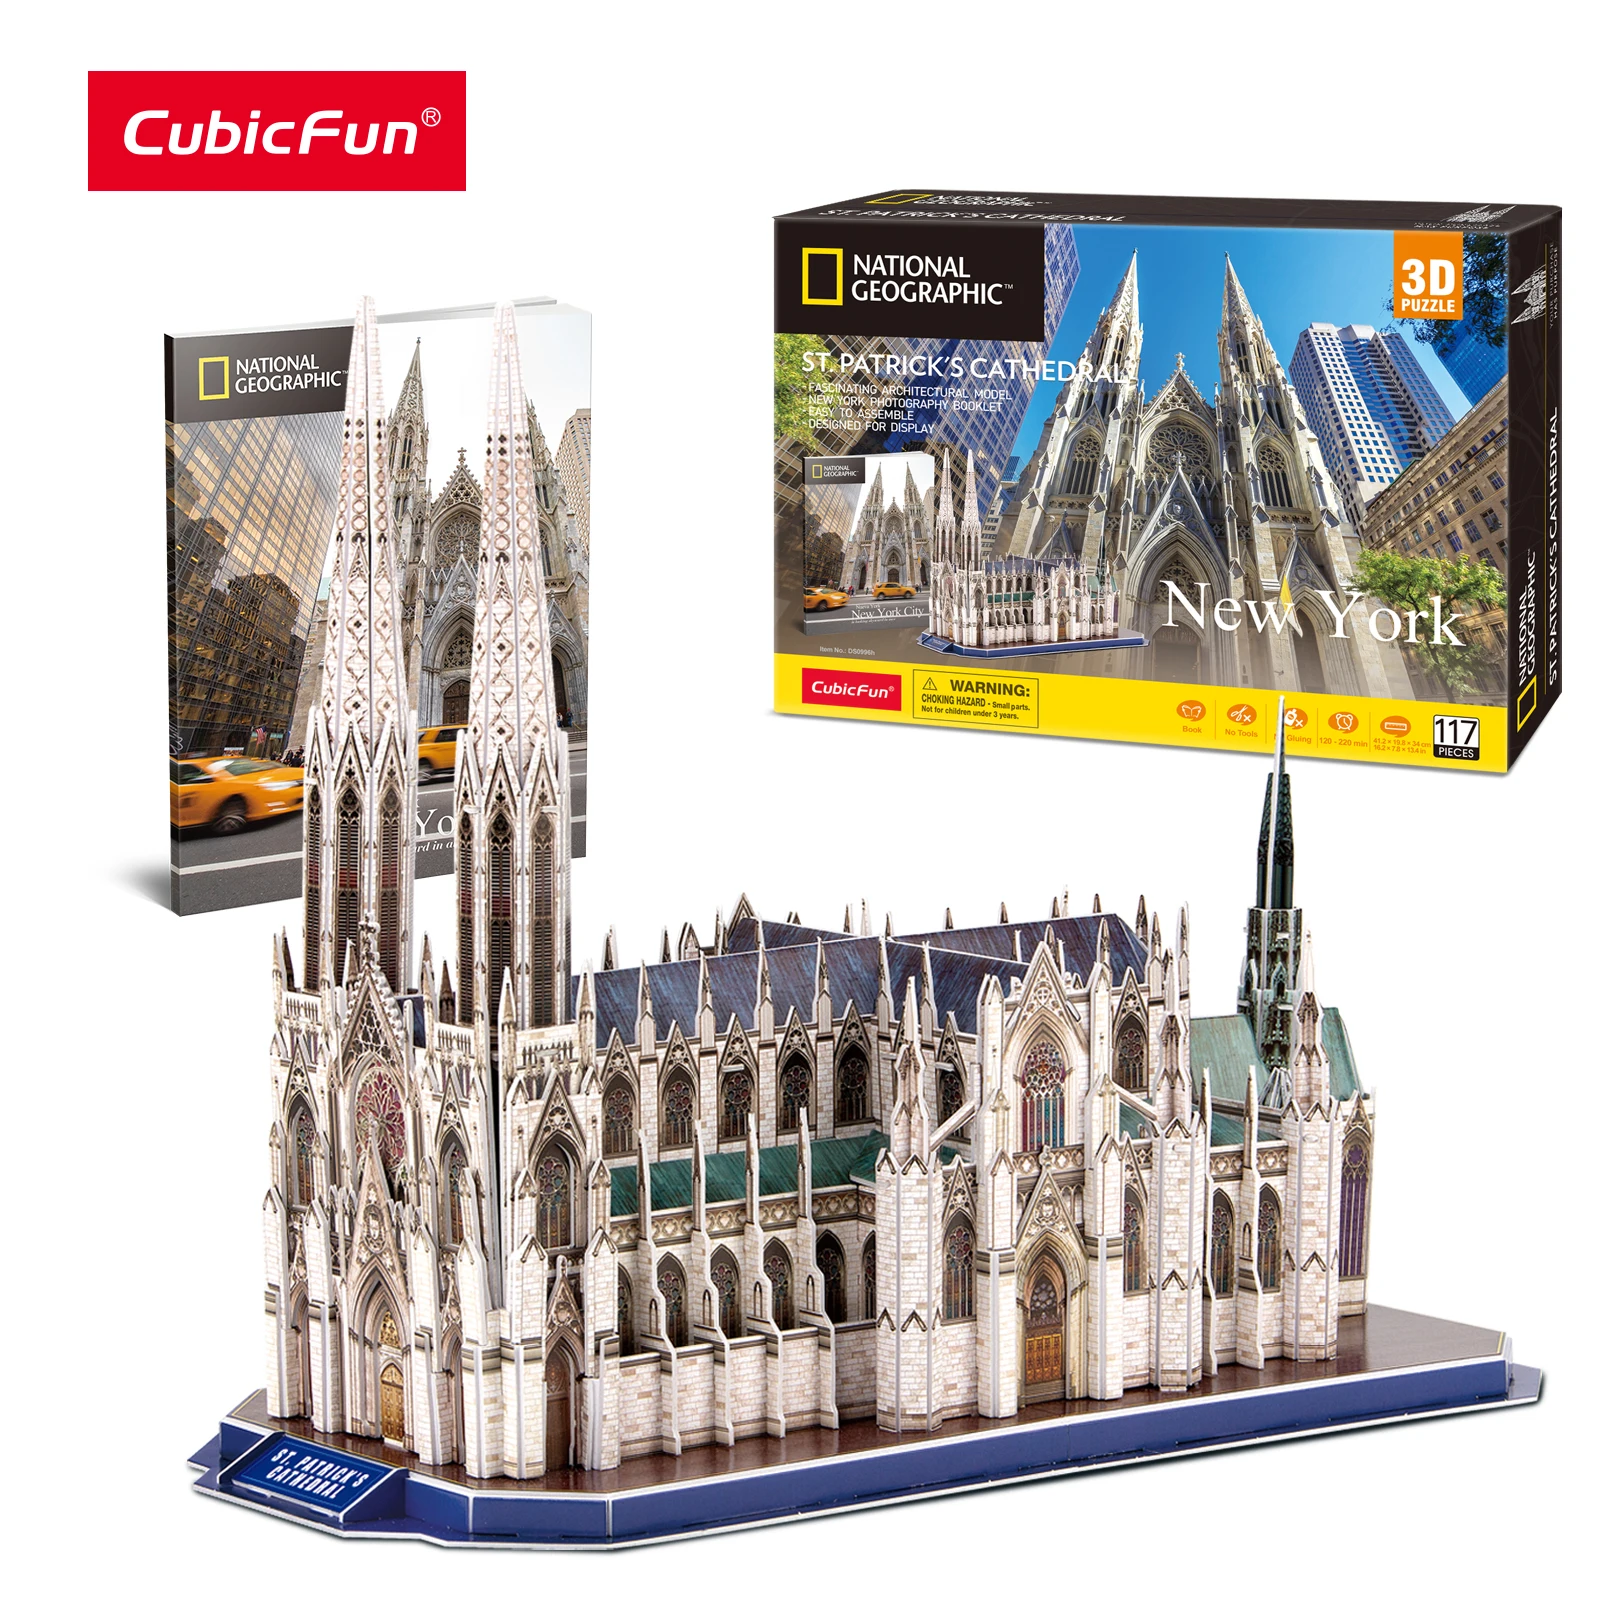 Definir Pigmalión Negligencia médica CubicFun 3D Puzzles National Geographic St. Patrick's Cathedral Model Kits  117Pcs New York Architecture Building for Adults Kids _ - AliExpress Mobile